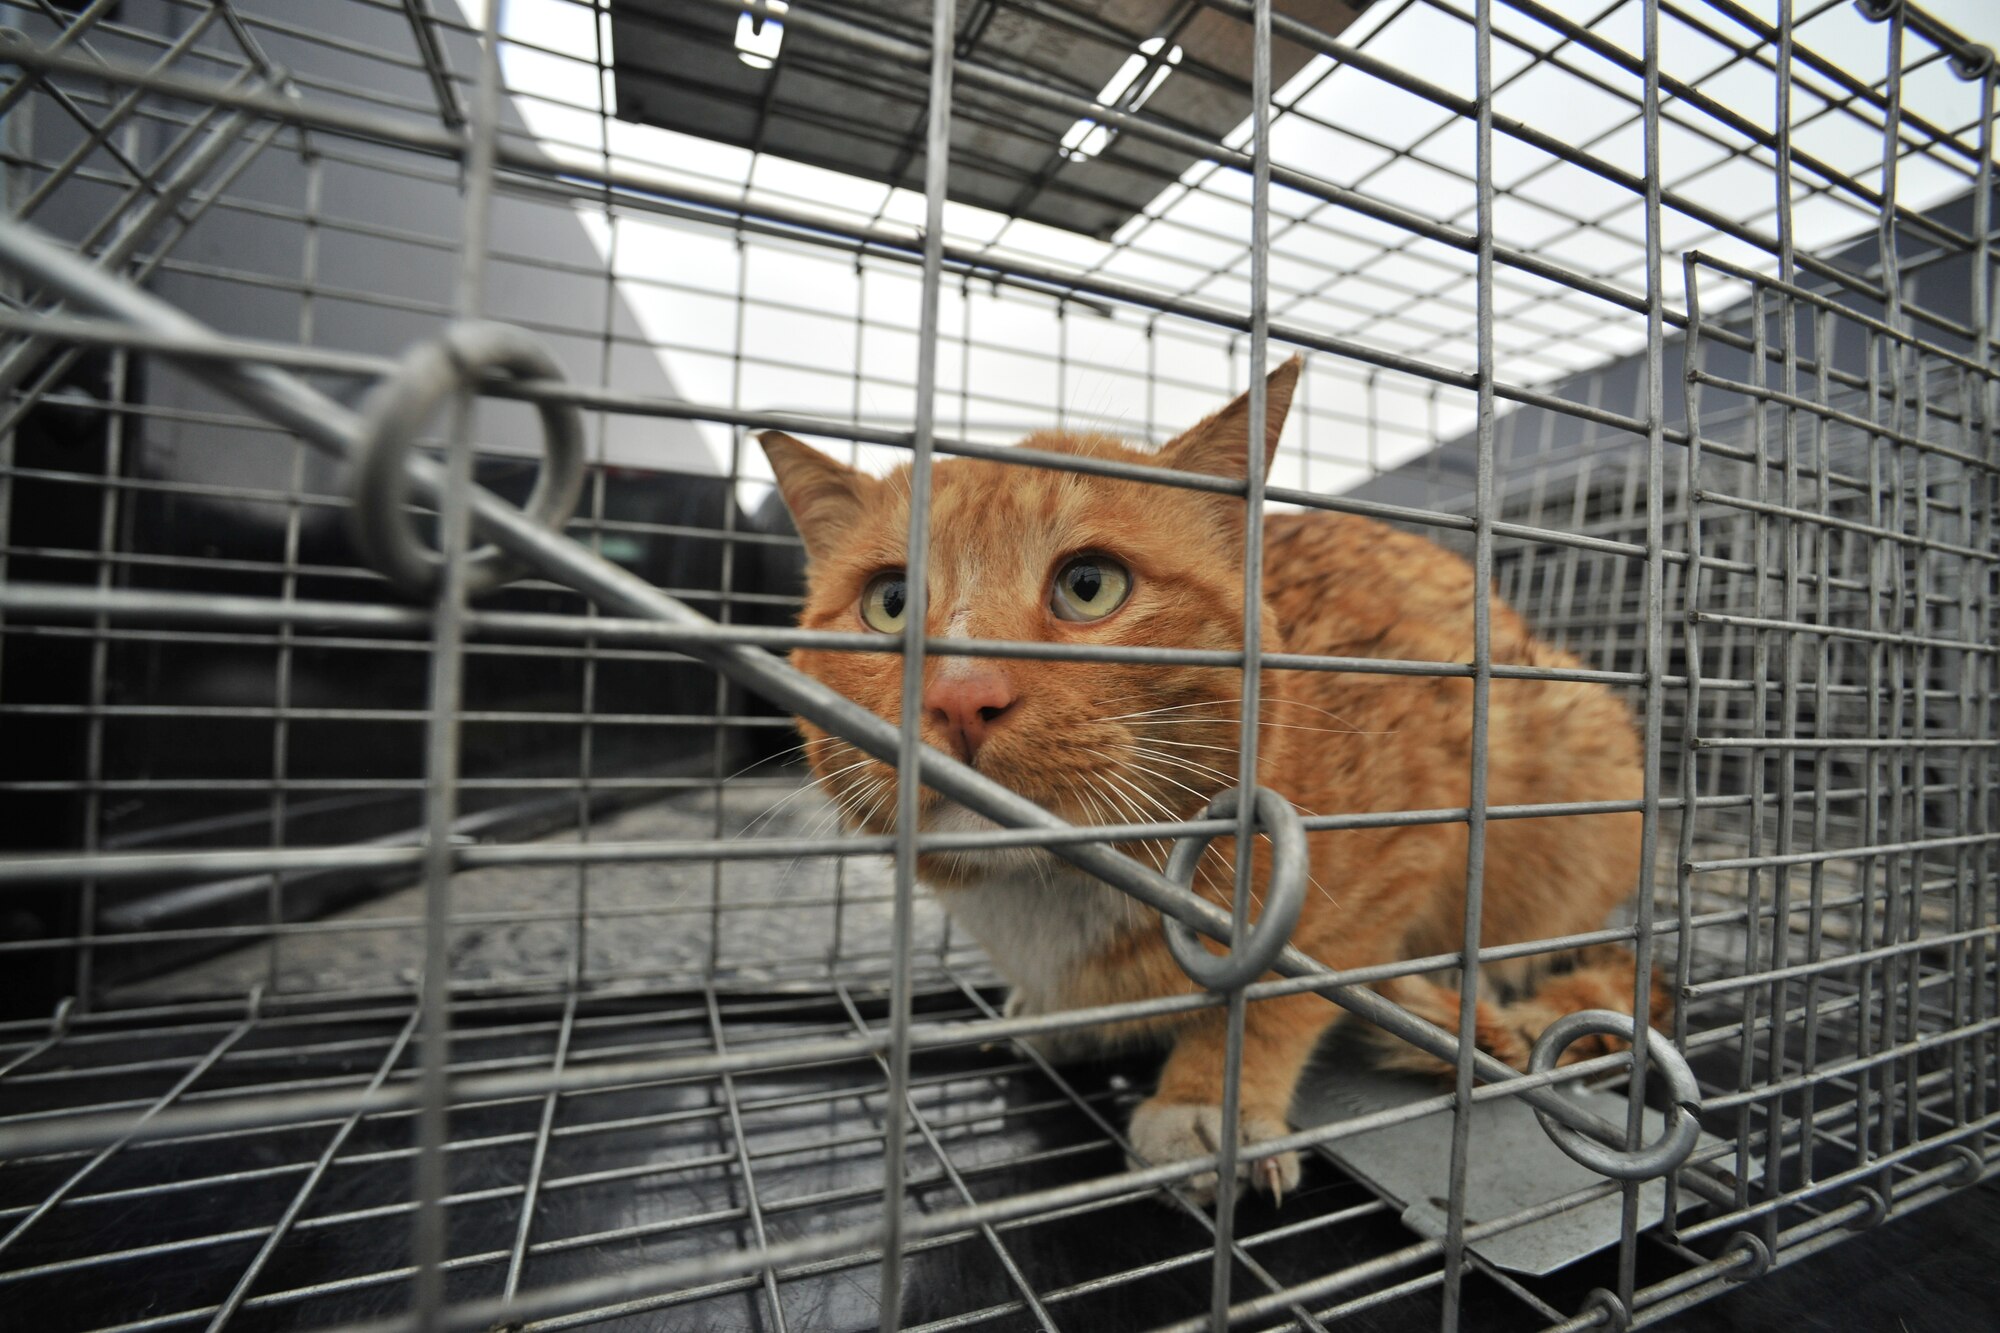 A stray cat is captured by 8th Civil Engineer Squadron pest management Feb. 23, 2012, at Kunsan Air Base, Republic of Korea. Members of the 8th CES pest management section have eight live traps scattered around base, which are checked twice a day.  (U.S. Air Force photo by Senior Airman Brittany Y. Auld/Released)